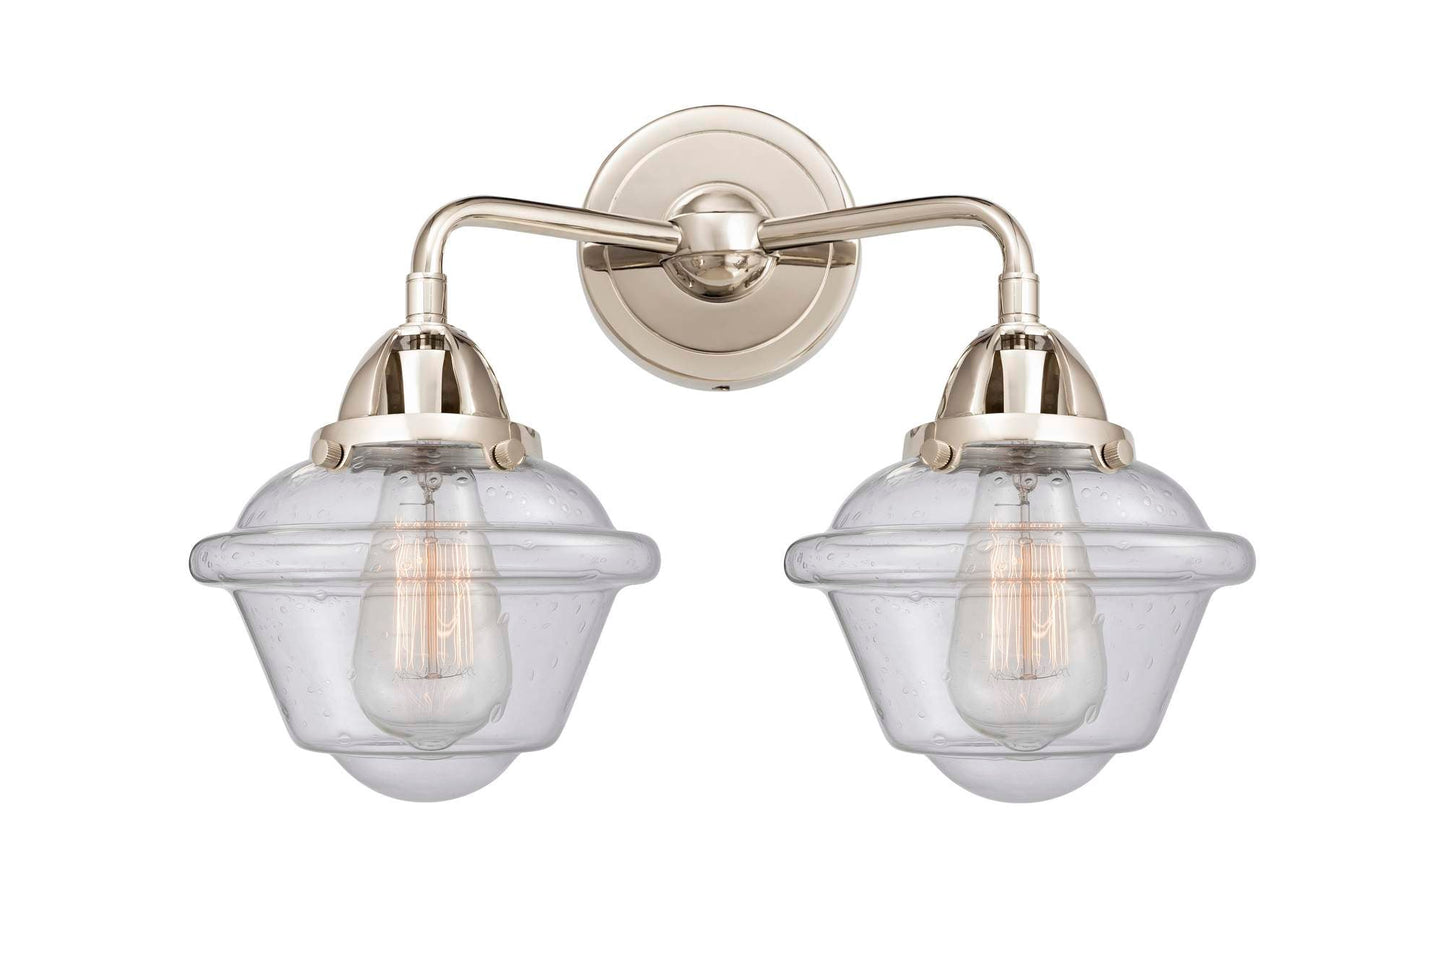 288-2W-PN-G534 2-Light 15.5" Polished Nickel Bath Vanity Light - Seedy Small Oxford Glass - LED Bulb - Dimmensions: 15.5 x 8 x 12.125 - Glass Up or Down: Yes